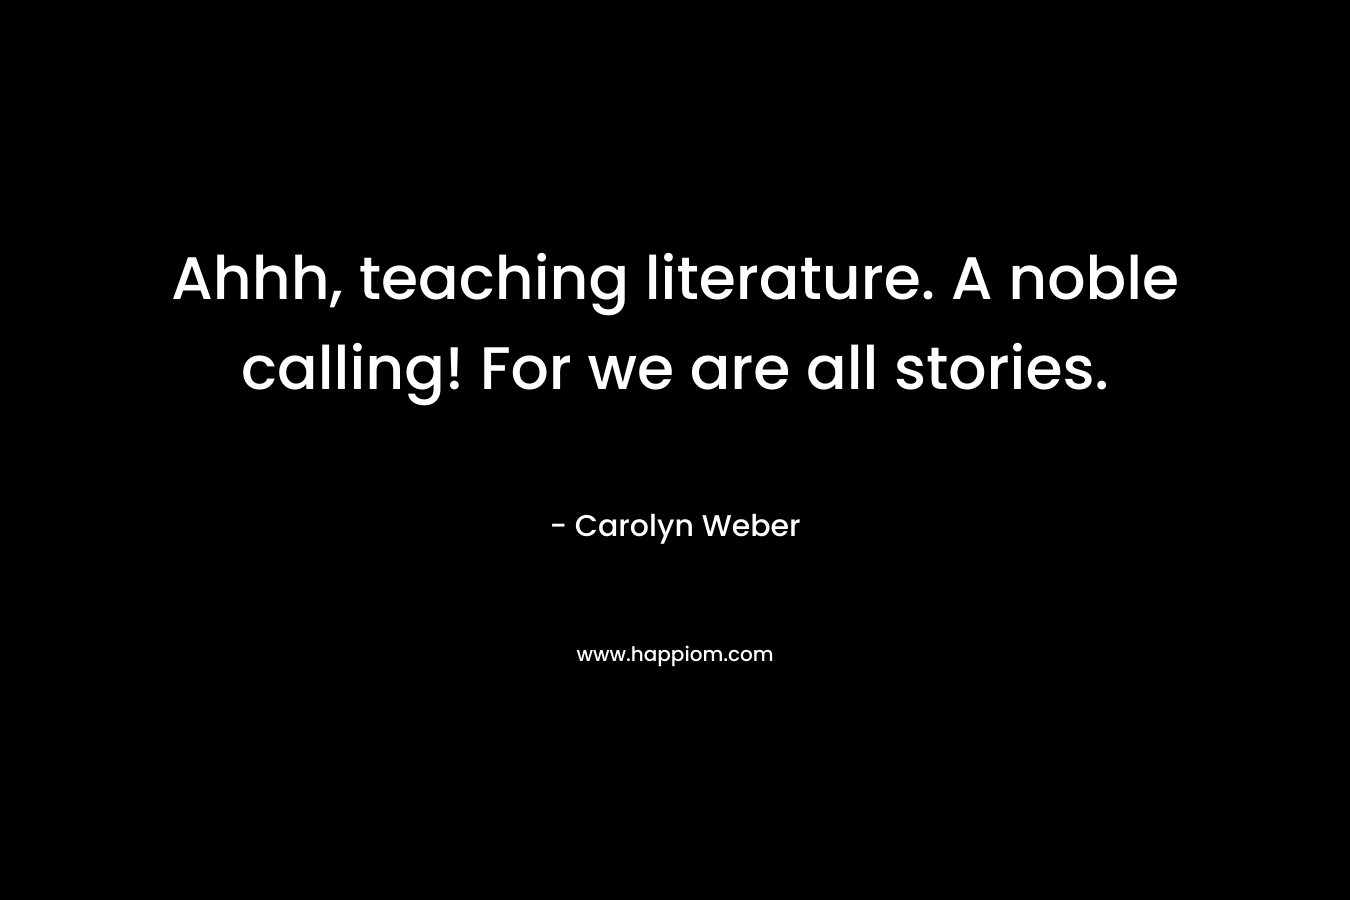 Ahhh, teaching literature. A noble calling! For we are all stories. – Carolyn Weber